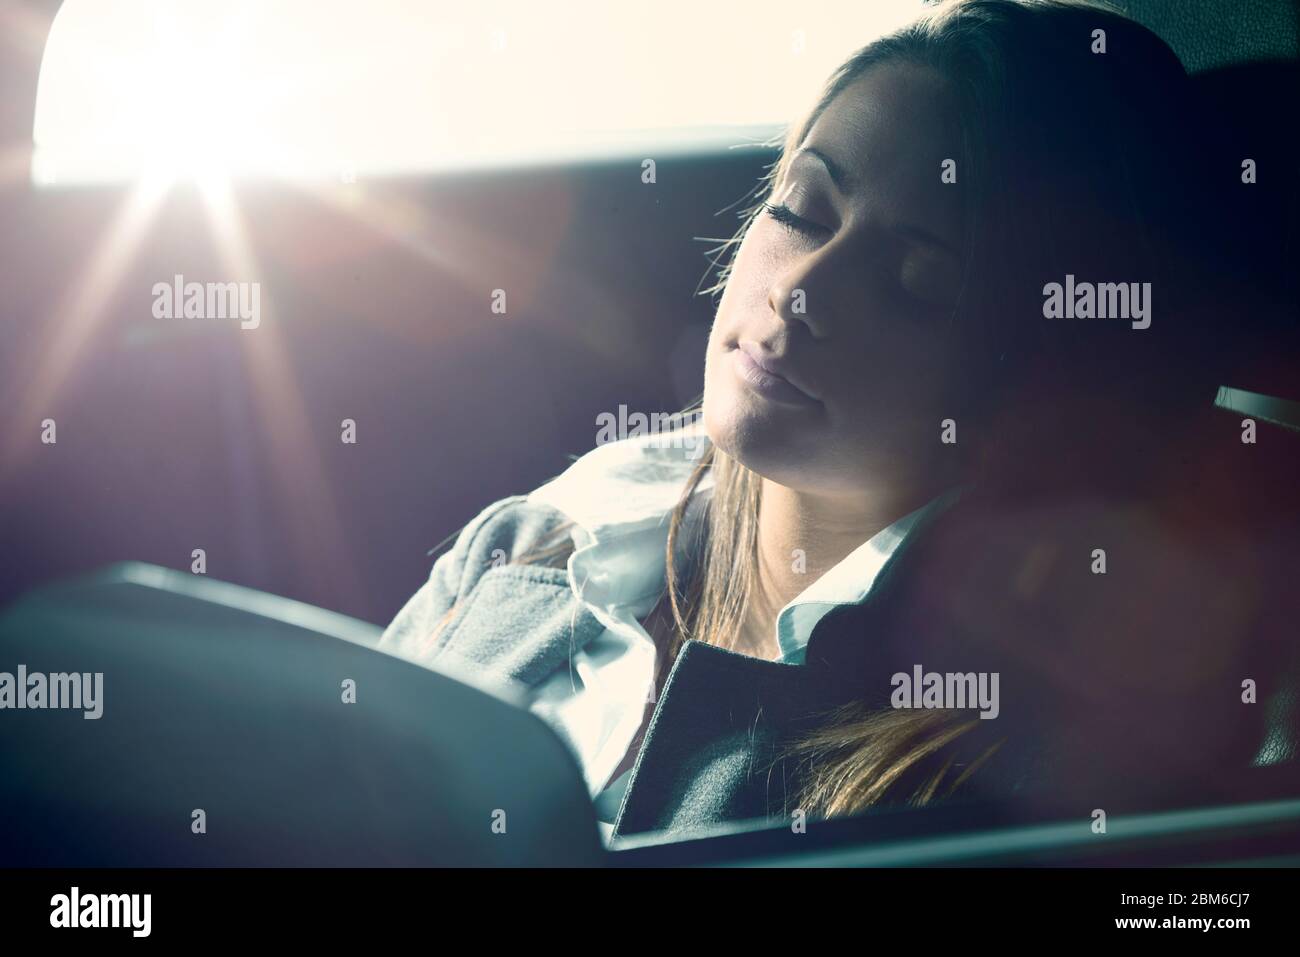 Exhausted young woman sleeping in a car with eyes closed. Stock Photo